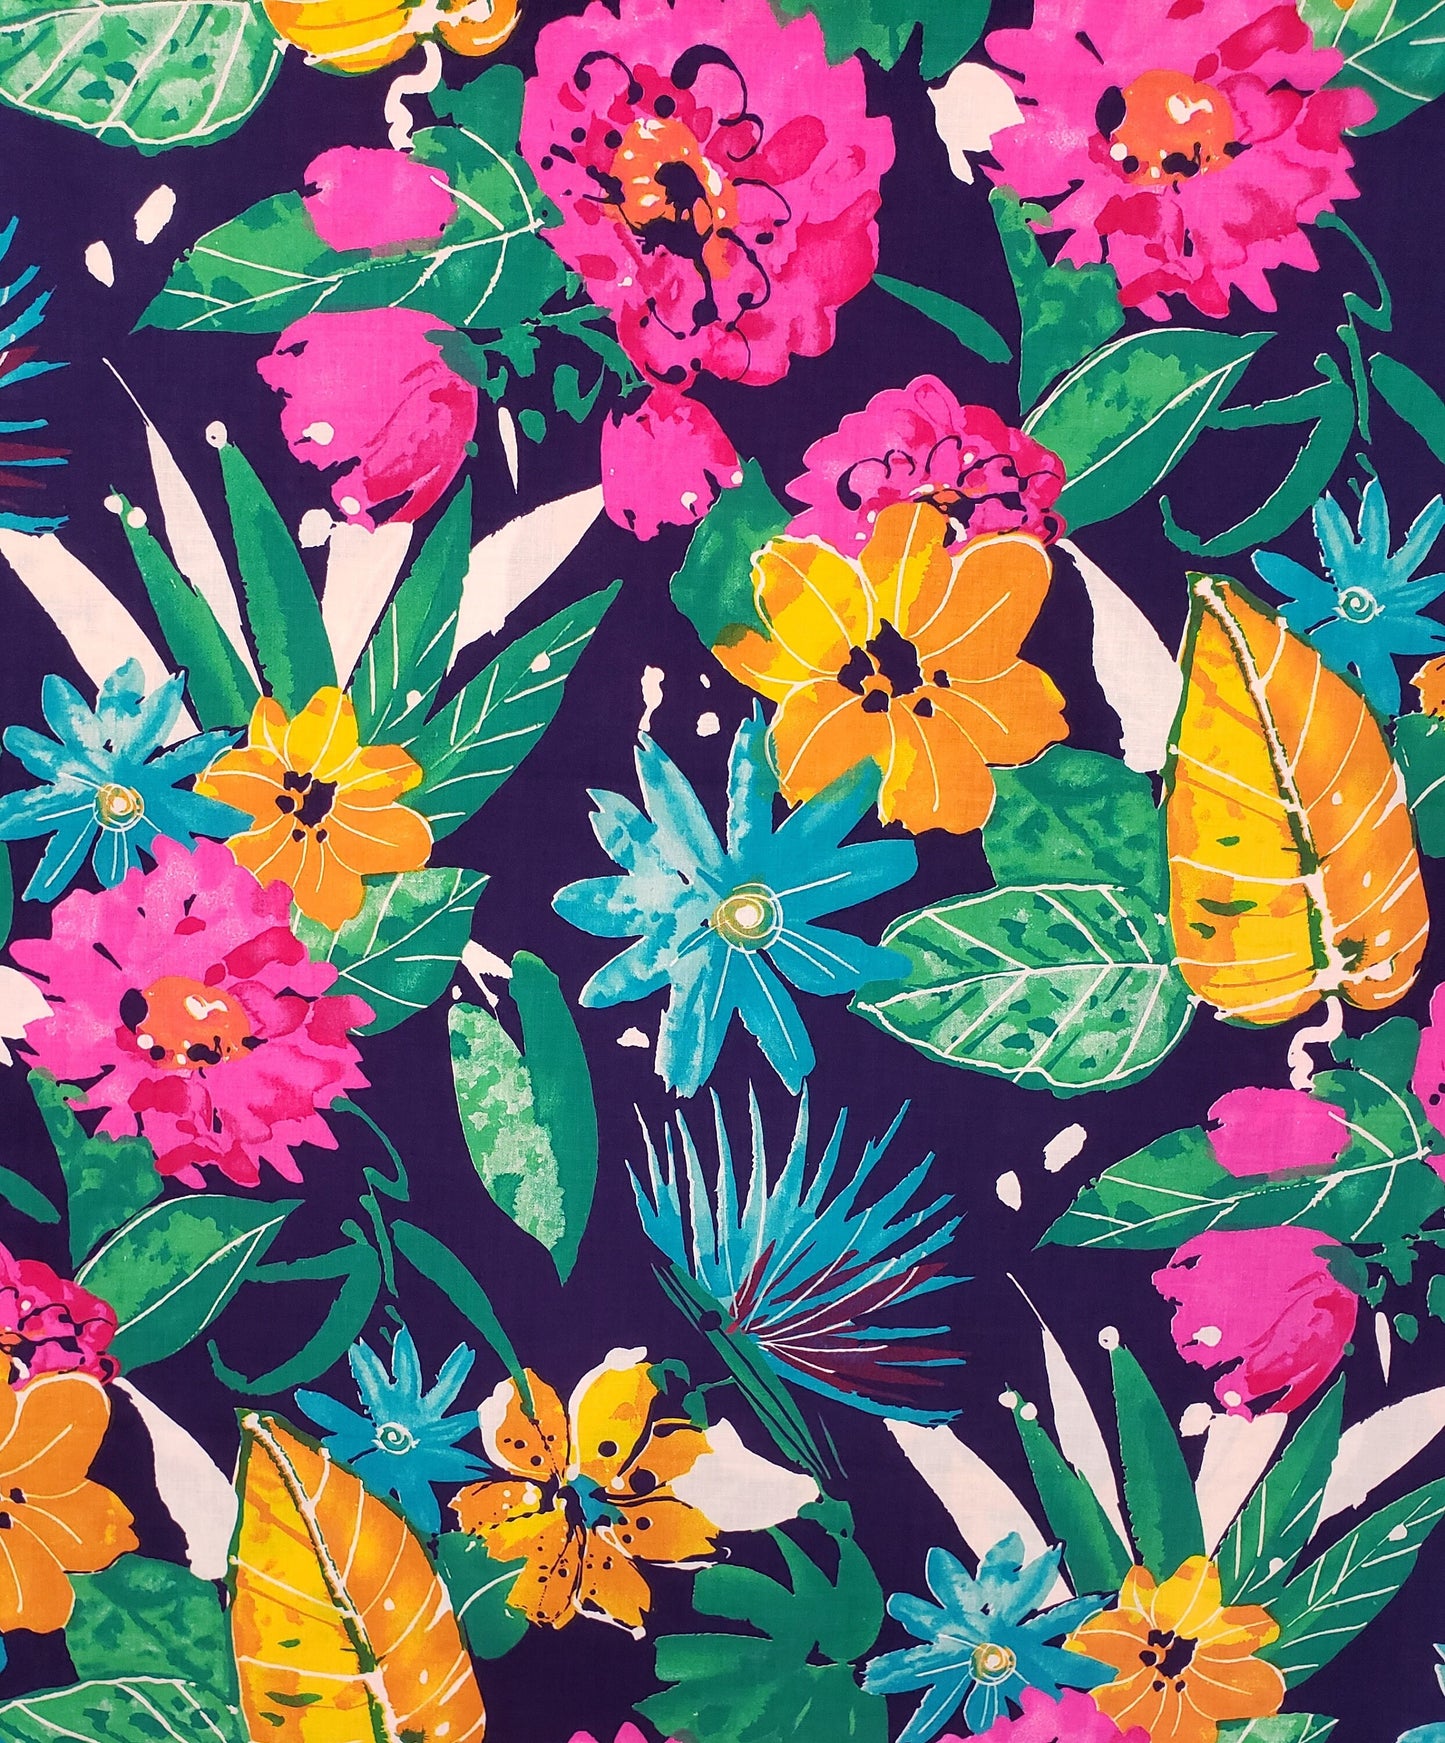 Dark Blue Fabric - Large, Brightly Colored Floral Print - 60-INCH WIDE FABRIC